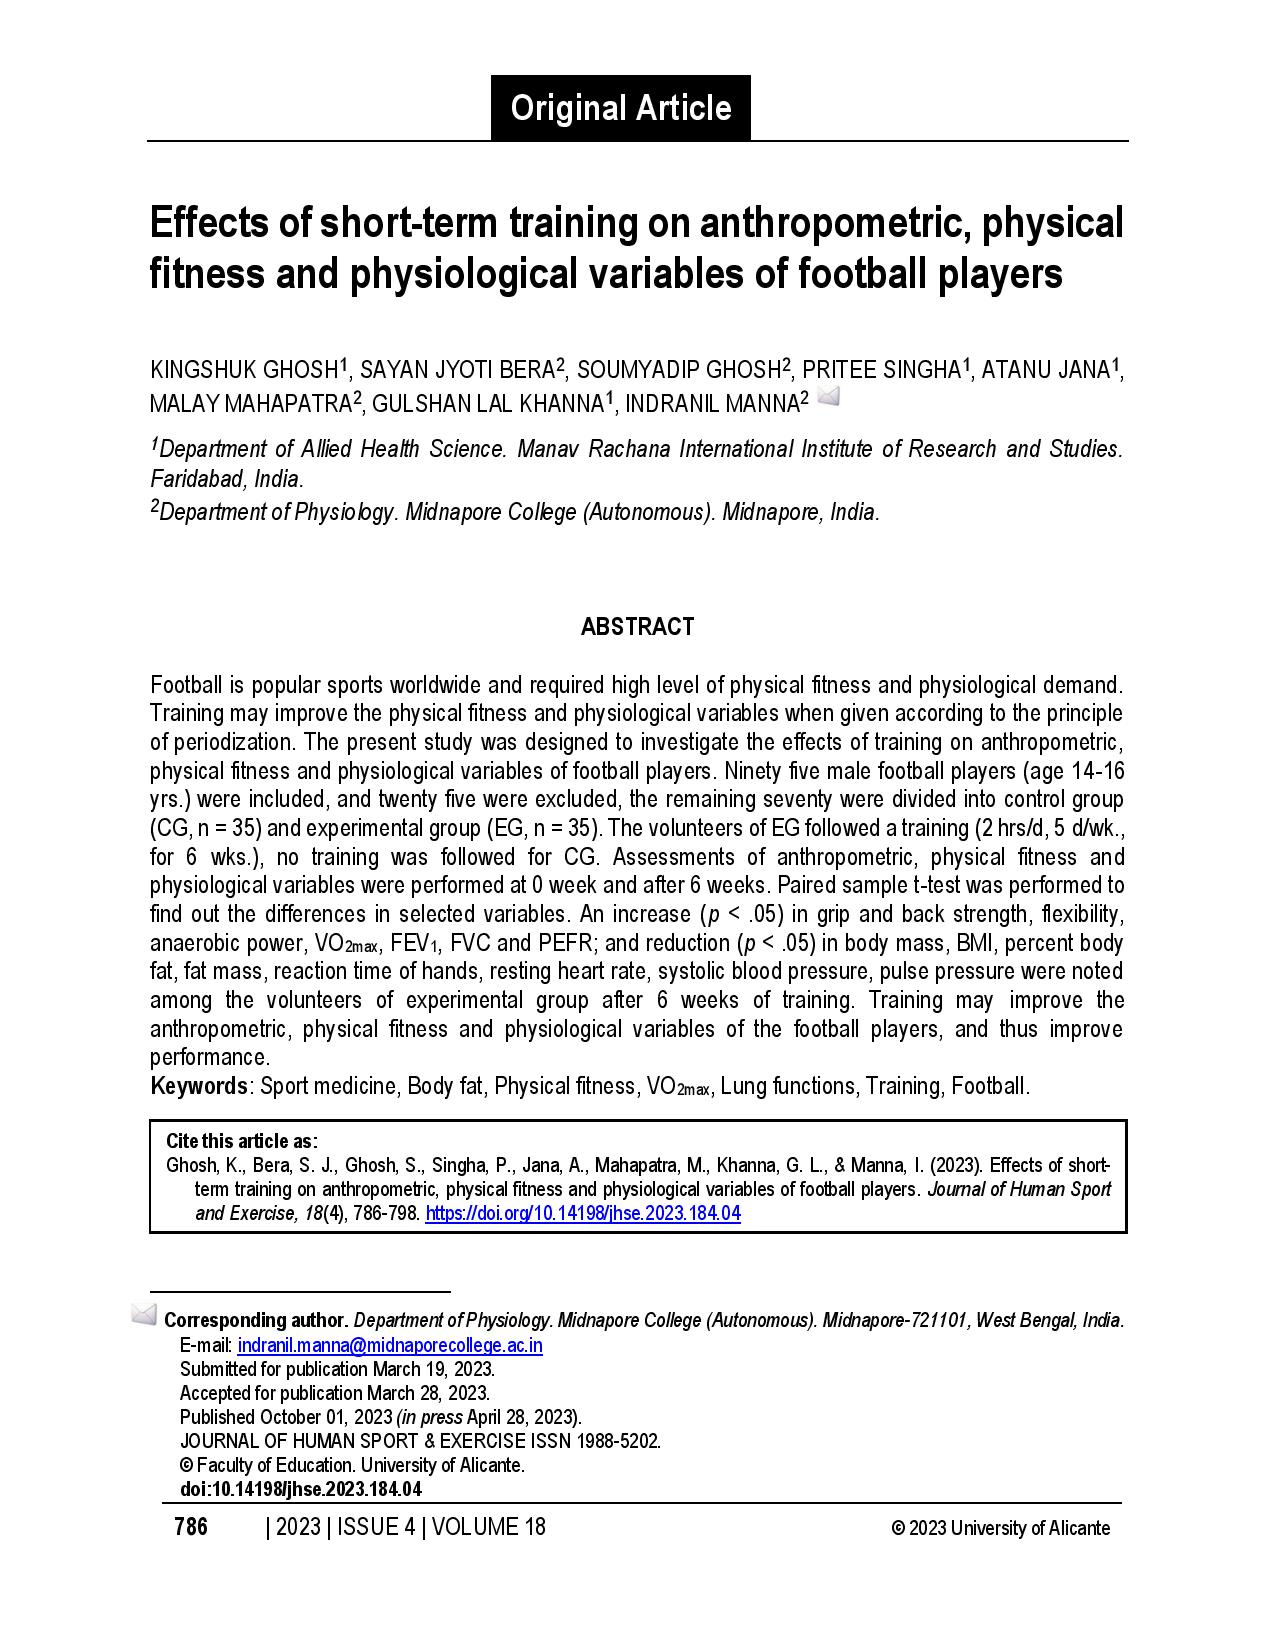 Effects of short-term training on anthropometric, physical fitness and physiological variables of football players